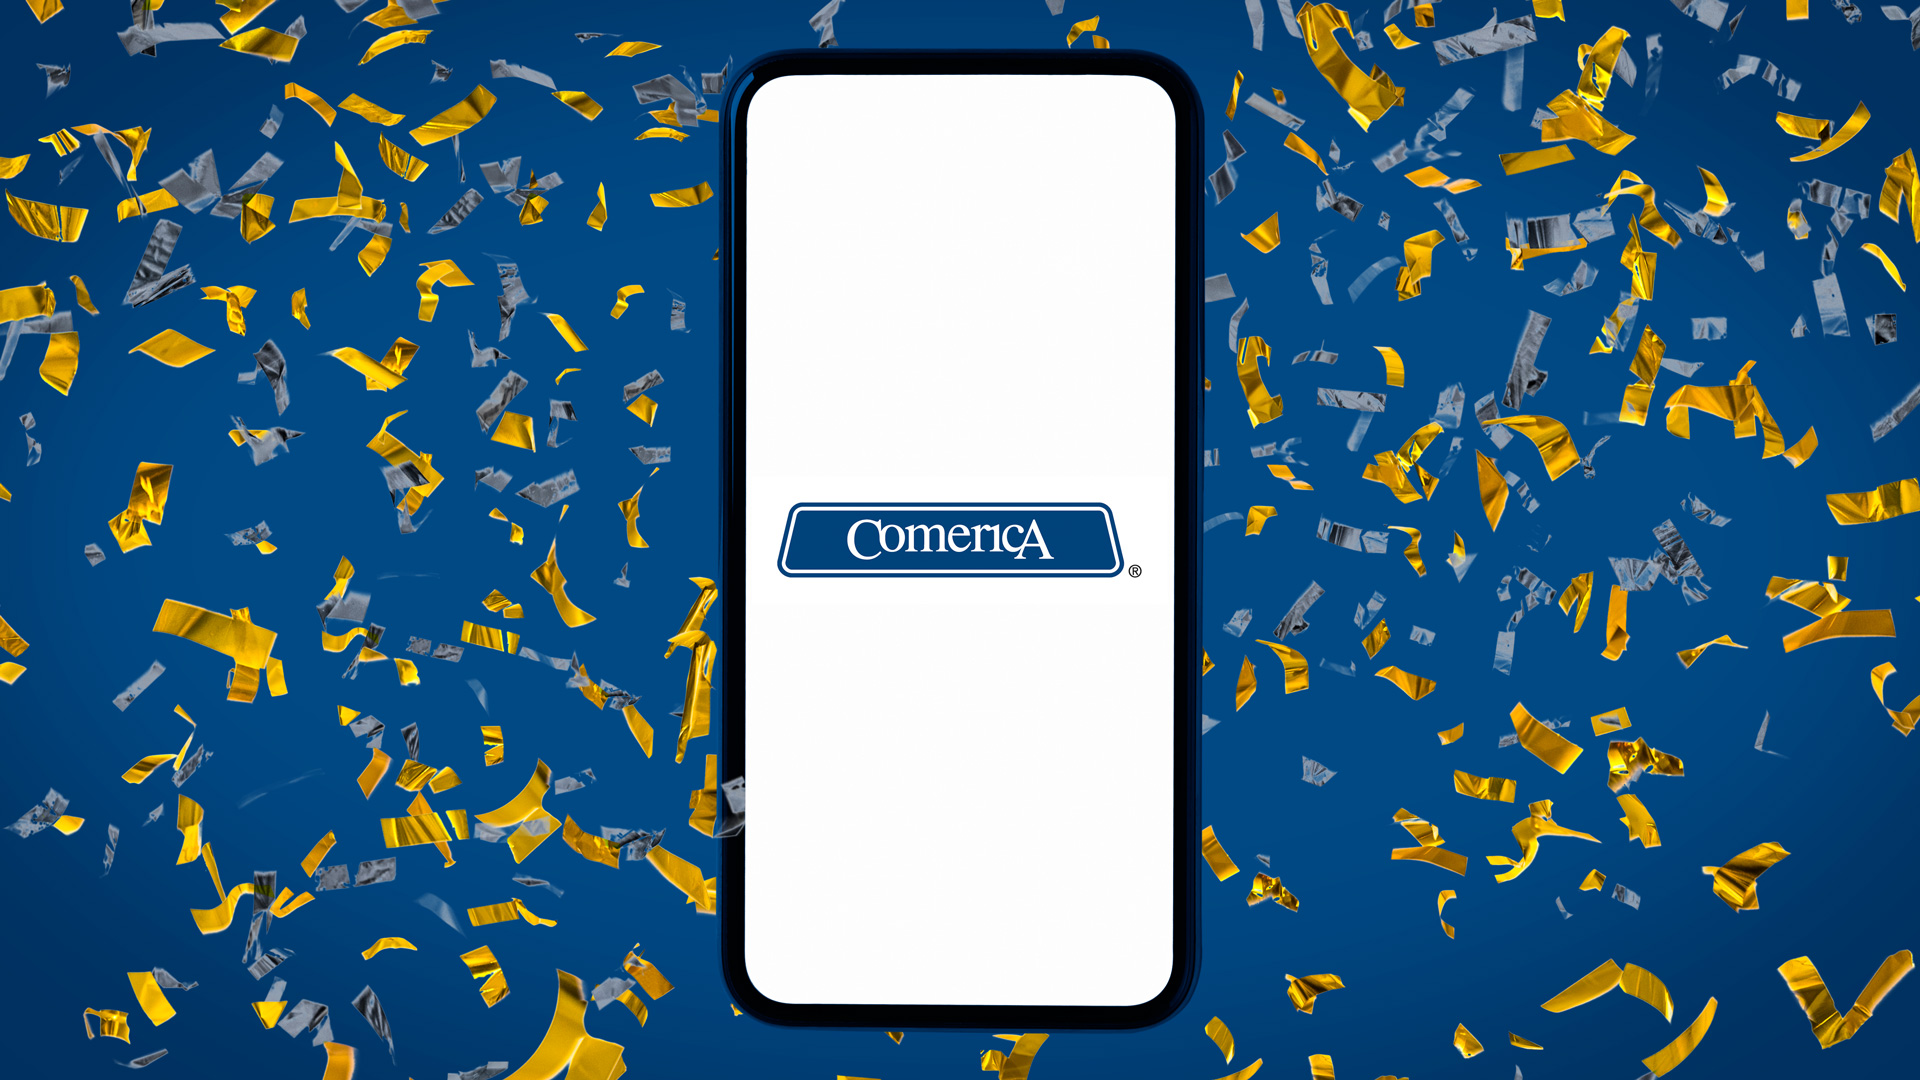 Newest Comerica Bank Promotions Best Offers, Coupons and Bonuses